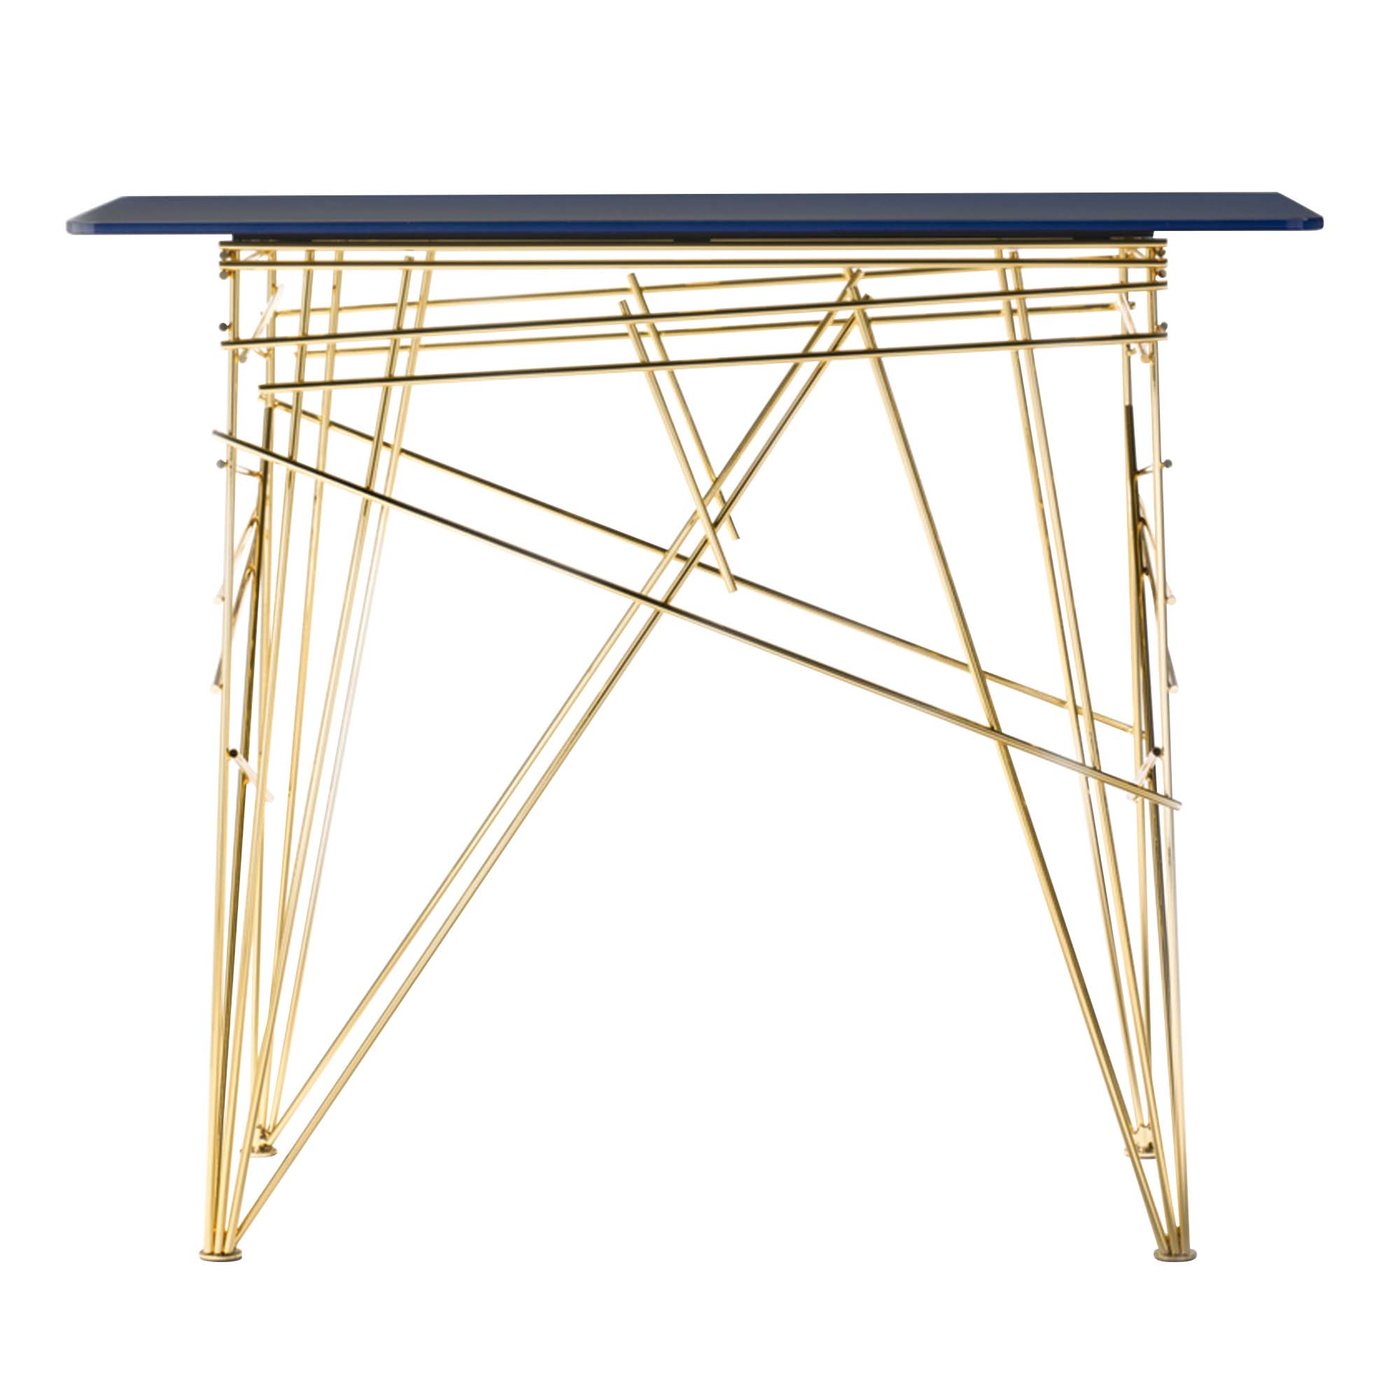 Lin Console by Claudia Campone and Martina Stancati - Main view